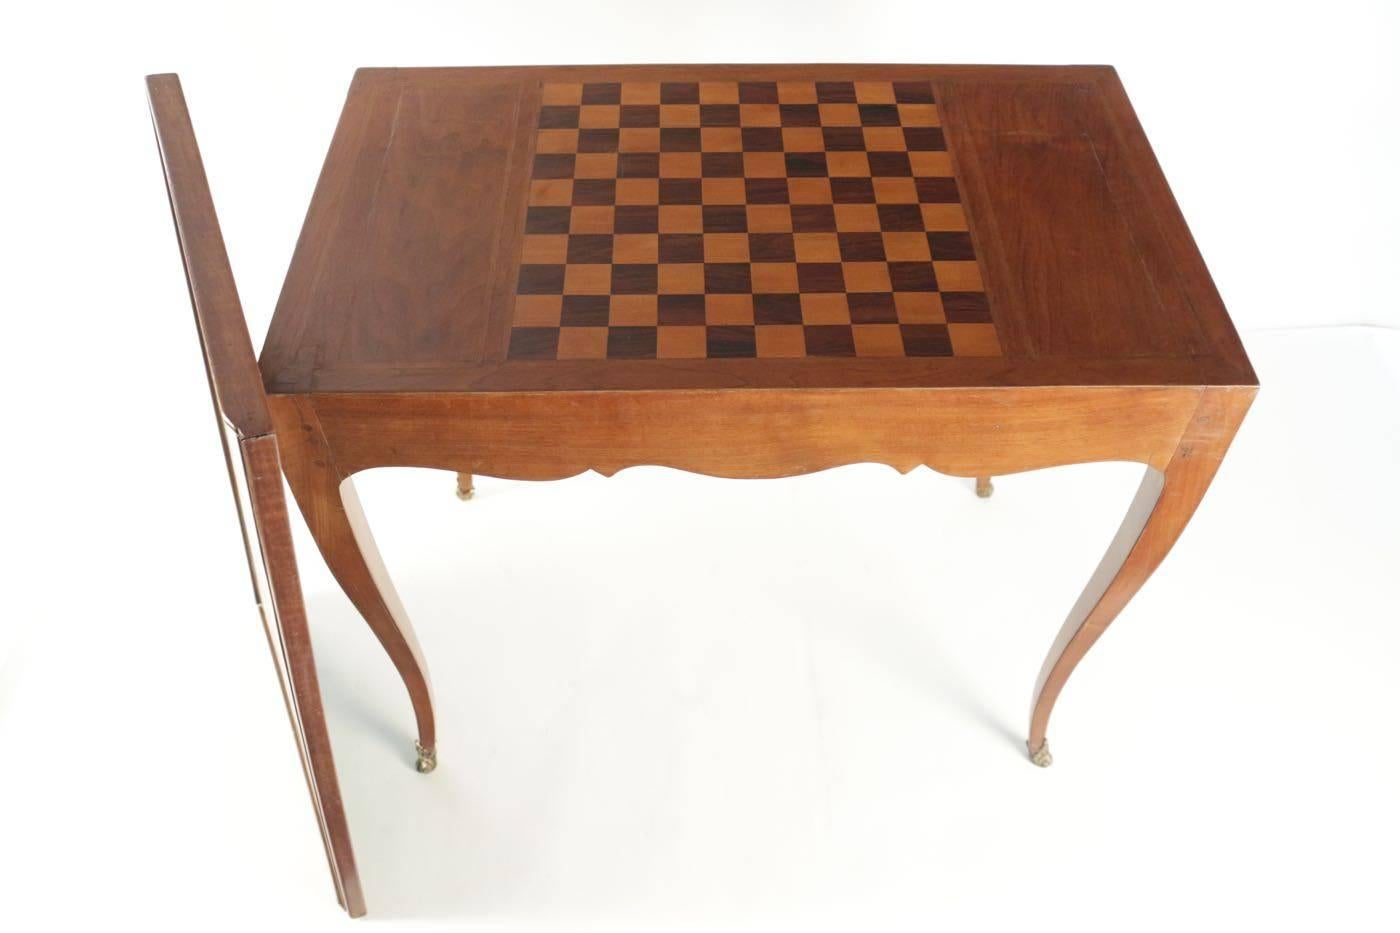 Writing desk and games table 19th century with leather top removable top covering a checker board. Two drawers.
 